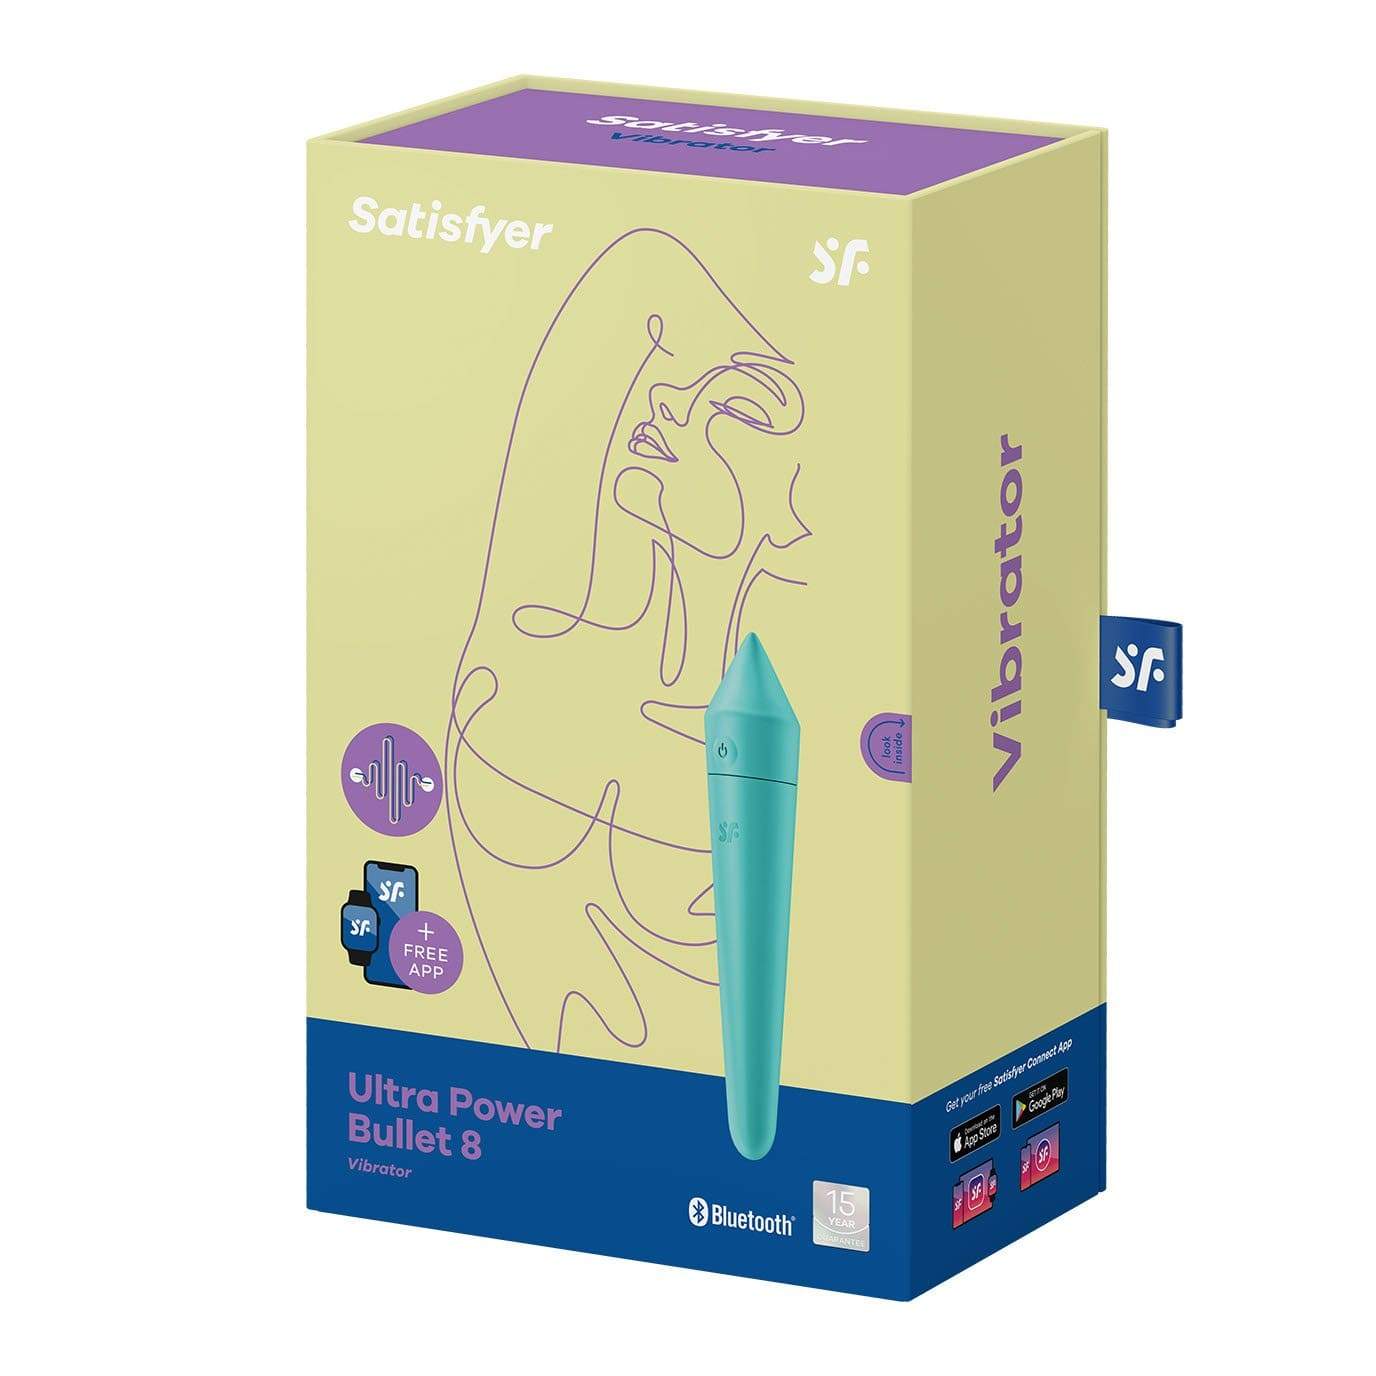 Satisfyer - Ultra Power Bullet 8 Vibrator with Bluetooth and App (Turquoise) Bullet (Vibration) Rechargeable 4061504007748 CherryAffairs